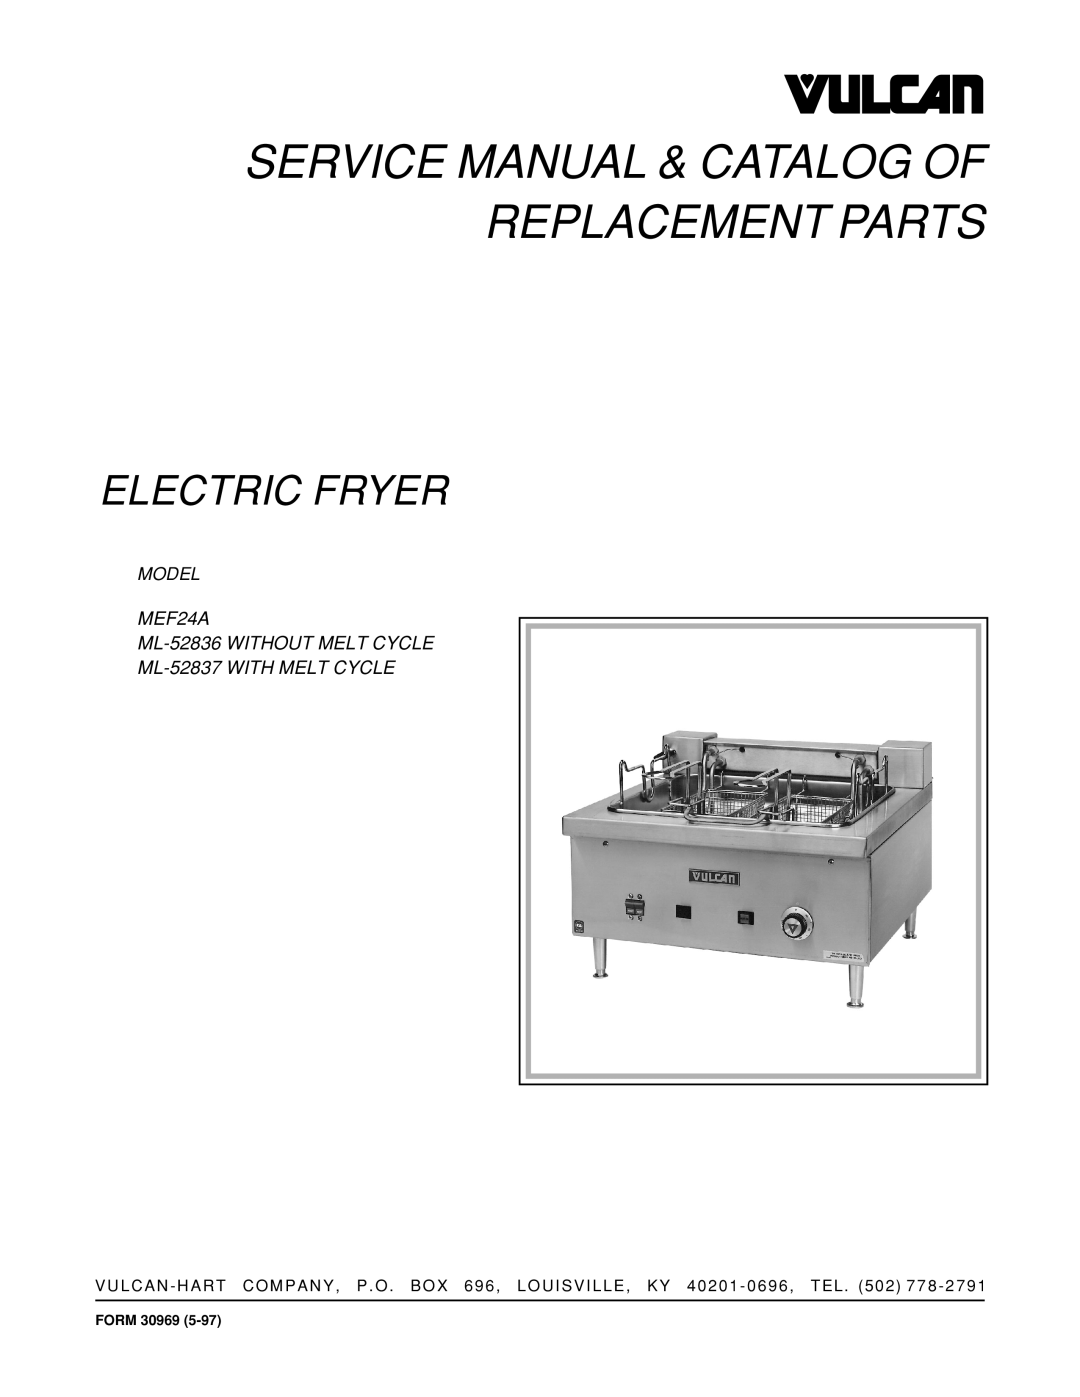 Vulcan-Hart service manual Service Manual & Catalog Of Replacement Parts, Electric Fryer, ML-52837WITH MELT CYCLE 